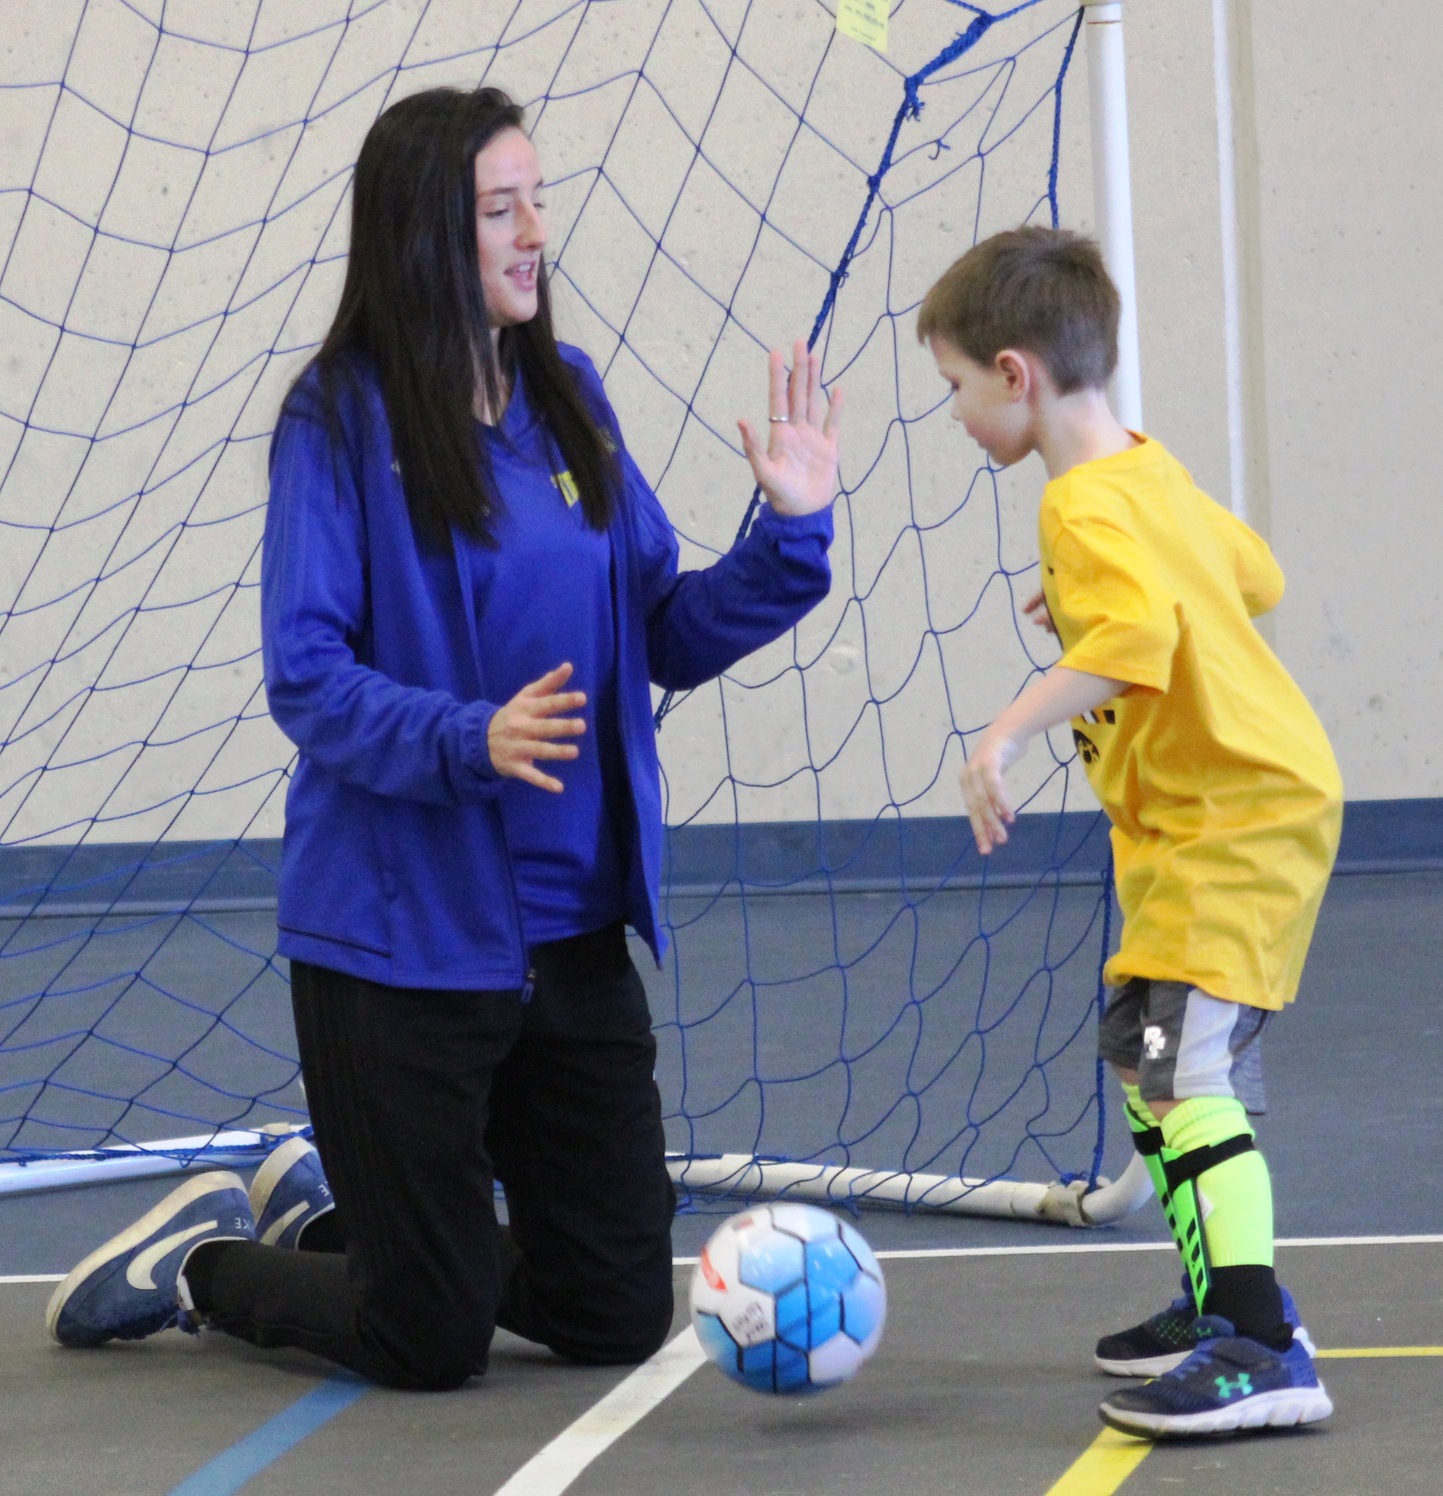 NIACC women's soccer coach Daisy Simms at youth soccer camp Tuesday morning in the NIACC recreation center.